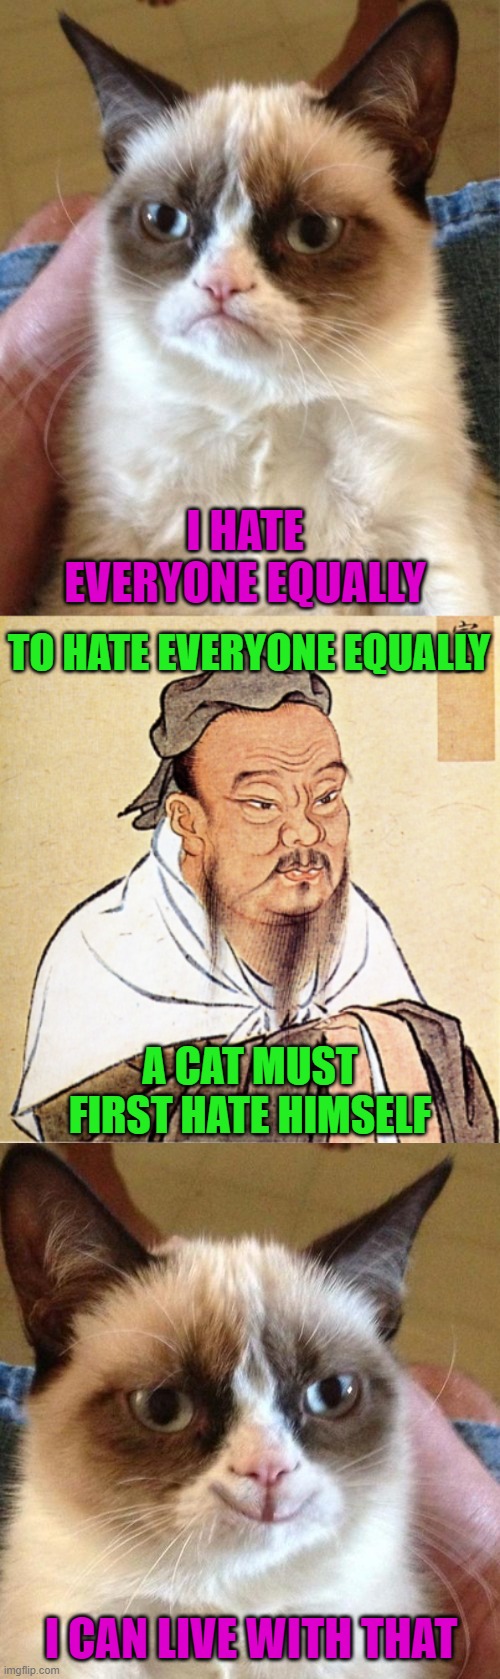 Be happy with who you are... |  I HATE EVERYONE EQUALLY; TO HATE EVERYONE EQUALLY; A CAT MUST FIRST HATE HIMSELF; I CAN LIVE WITH THAT | image tagged in memes,grumpy cat,confucius says,grumpy cat smiling,funny | made w/ Imgflip meme maker